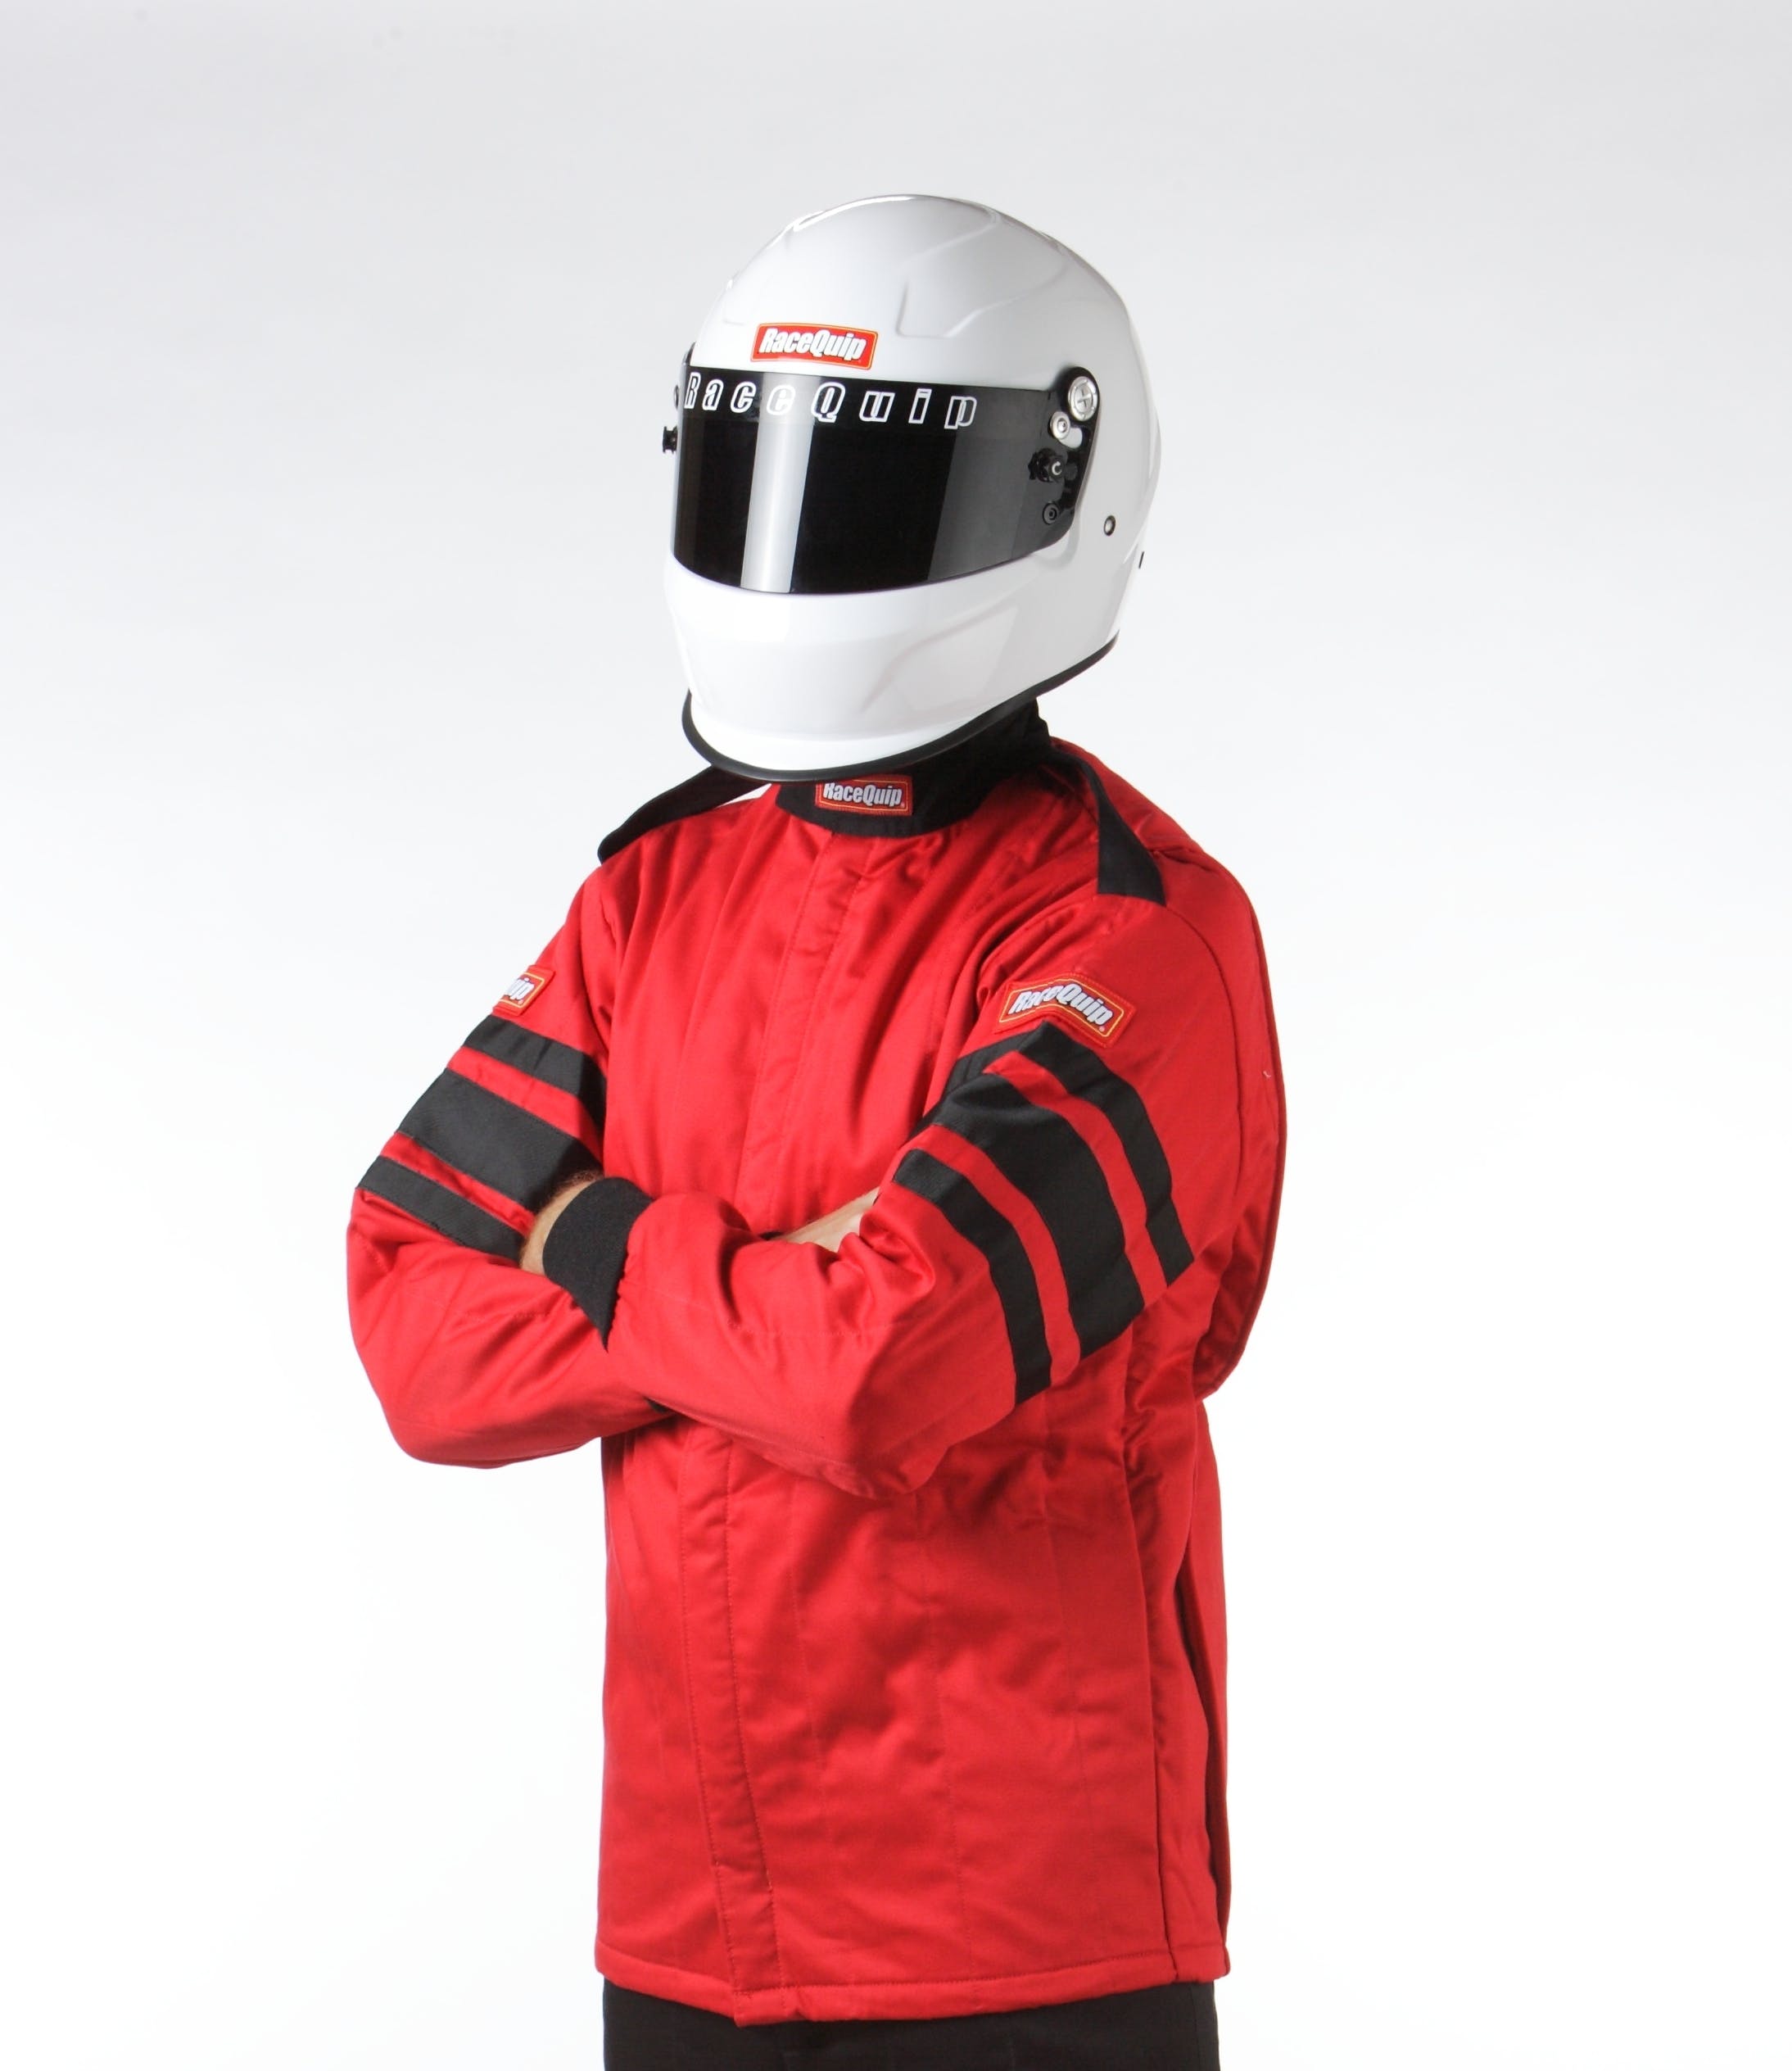 RaceQuip 121012 SFI-5 Pyrovatex Multi-Layer Racing Fire Jacket (Red, Small)